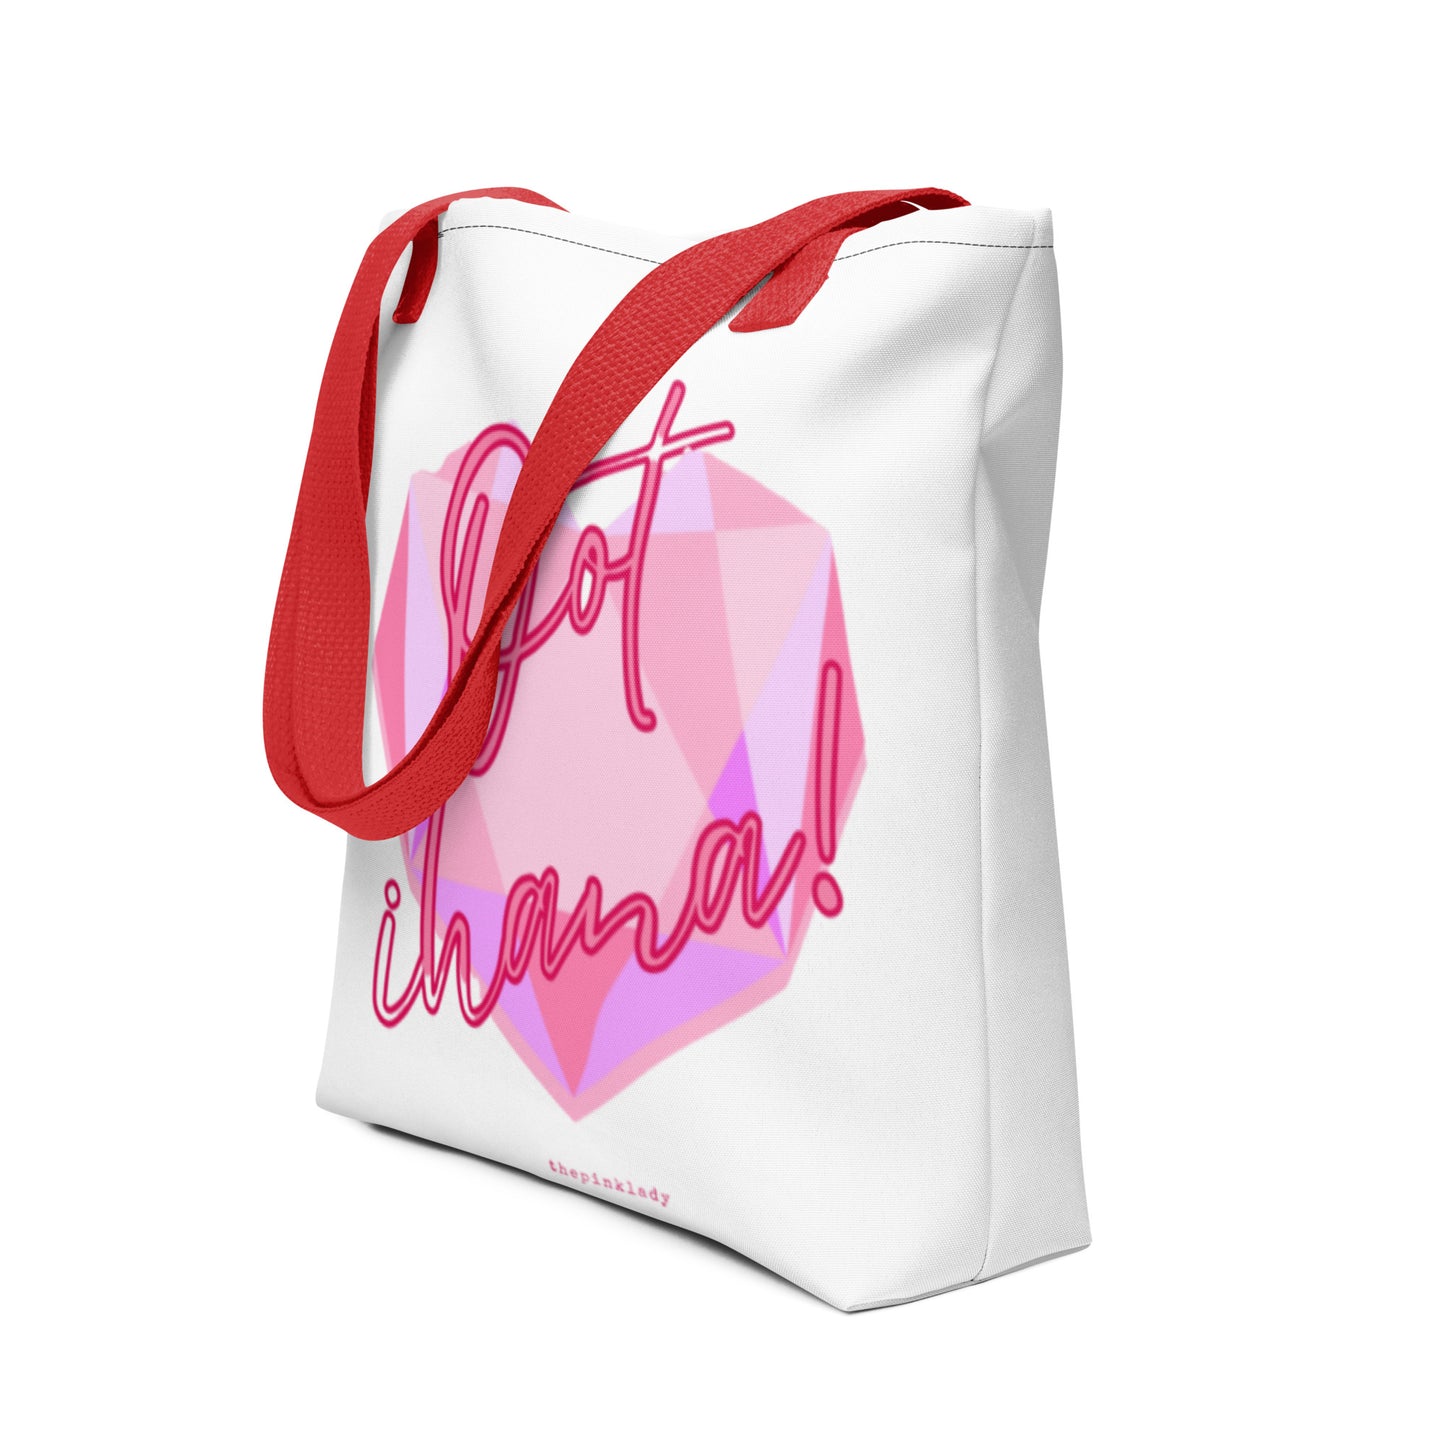 "You are wonderful" canvas bag, white